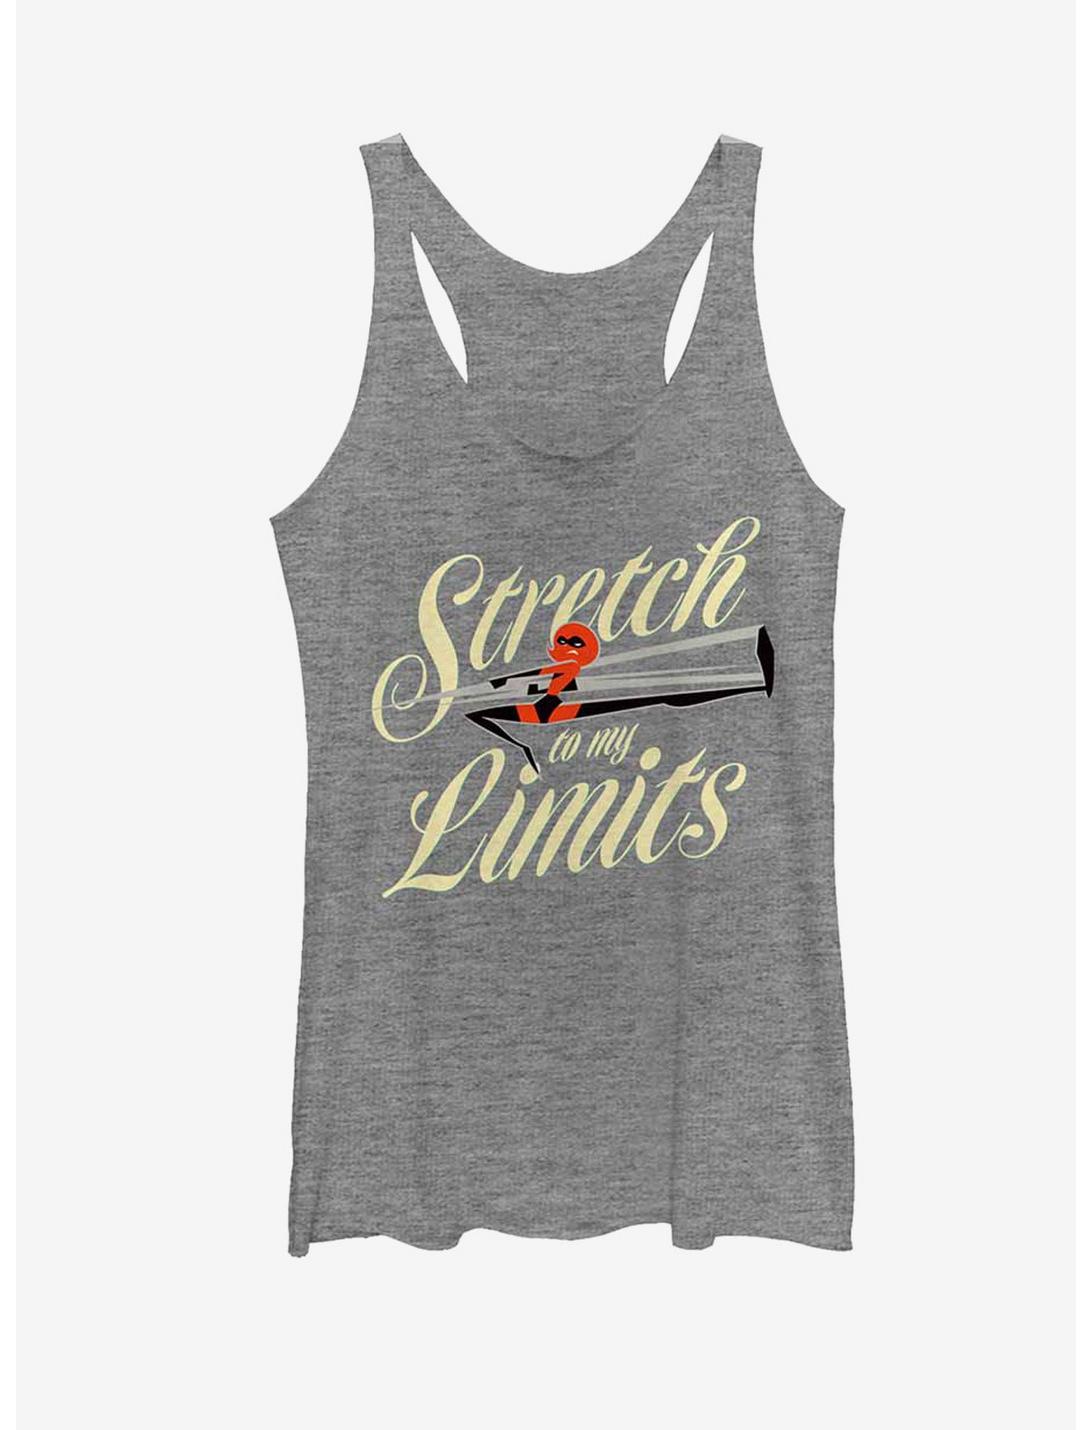 Disney Pixar The Incredibles Stretch To My Limits Womens Tank, GRAY HTR, hi-res